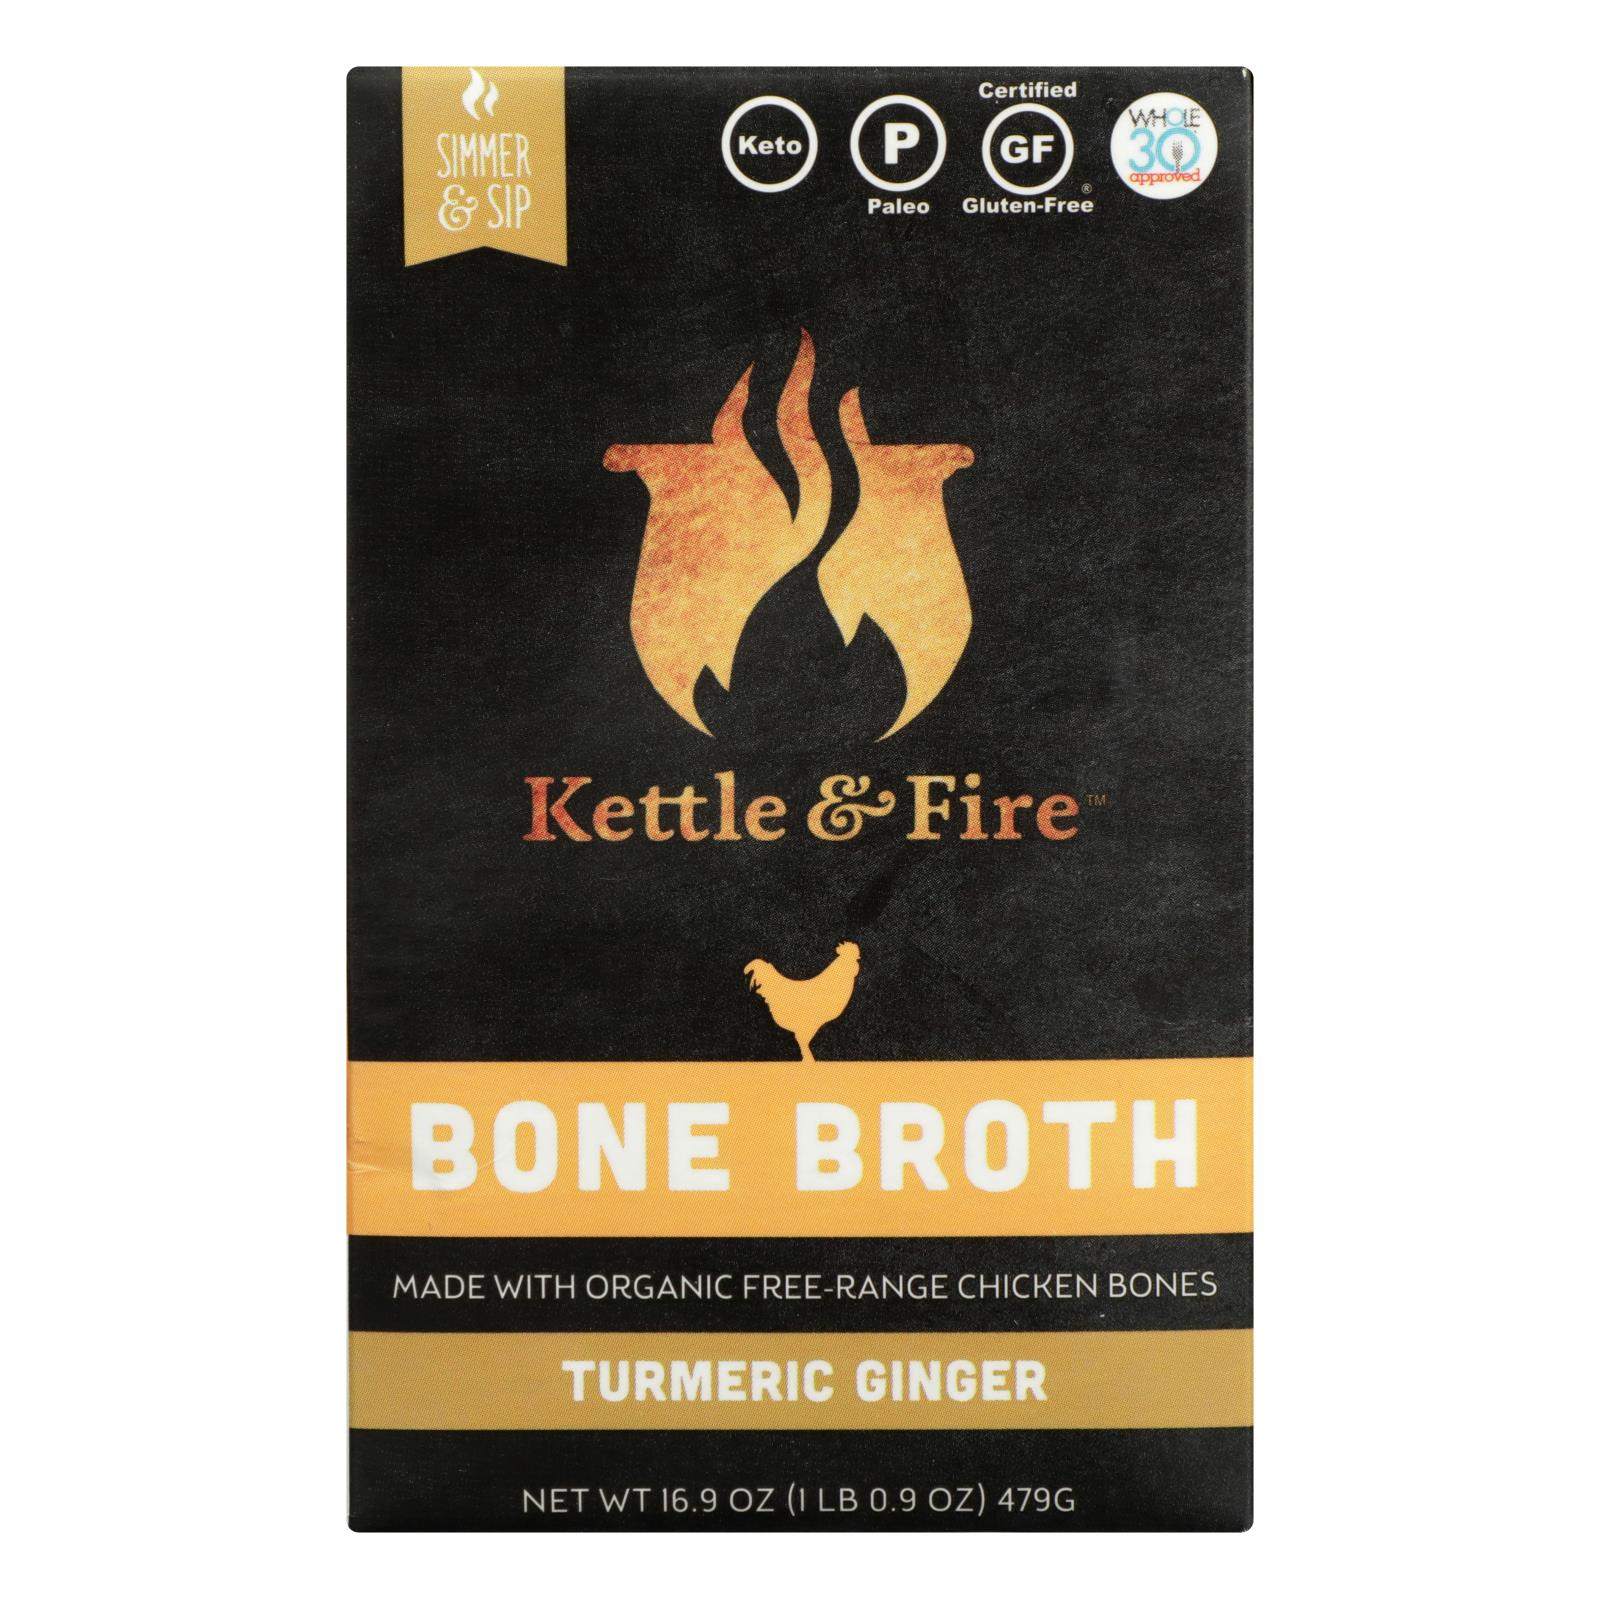 Kettle And Fire - Bone Broth Trmc Ginger Chicken - 6개 묶음상품 - 16.9 OZ